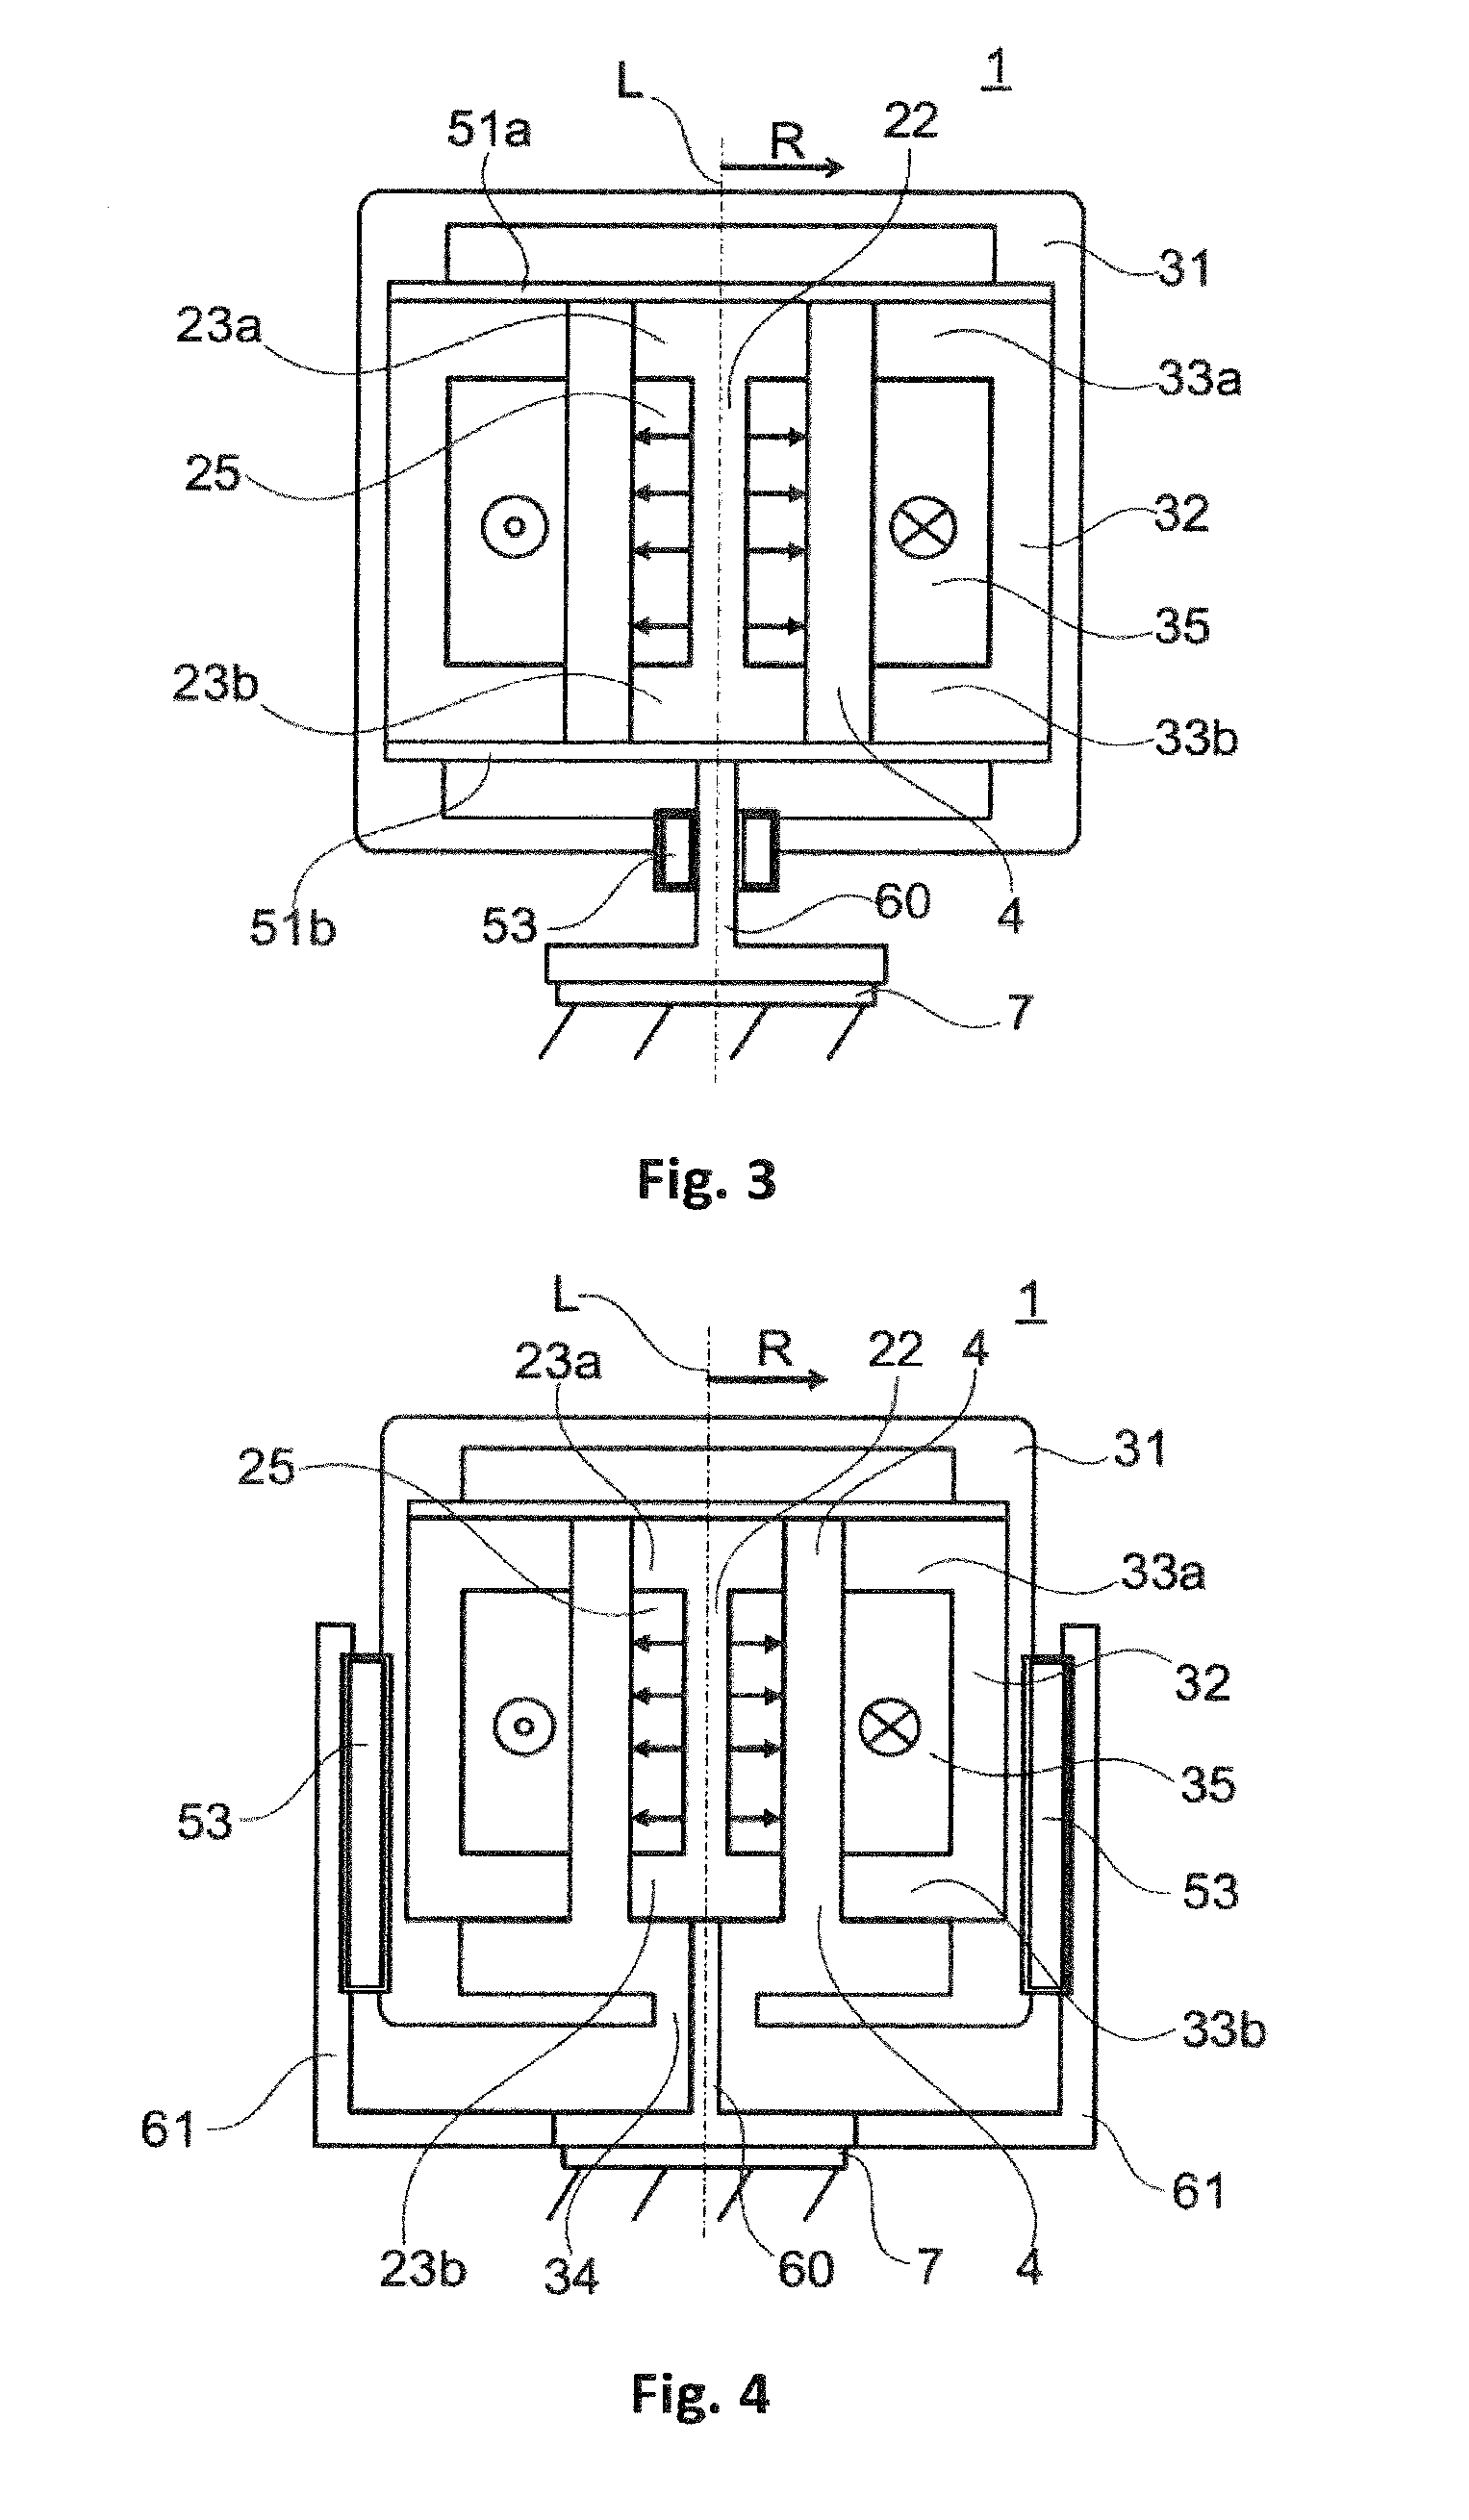 Actuator for damping low-frequency oscillations